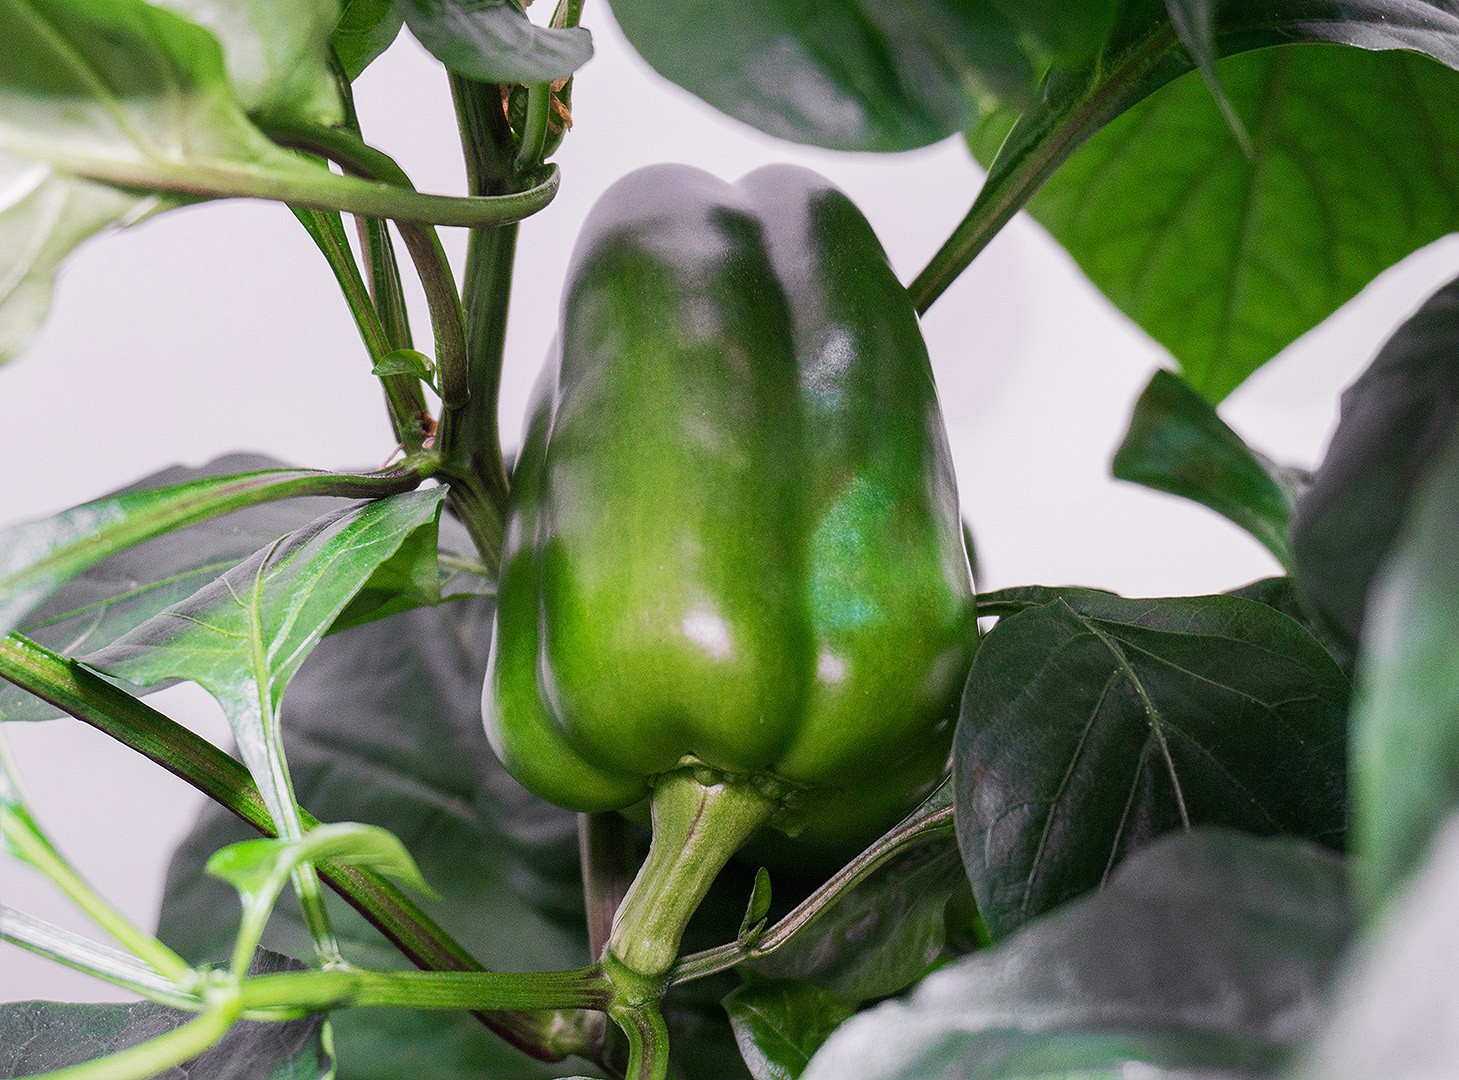 green peppers are another great food for gardeners.